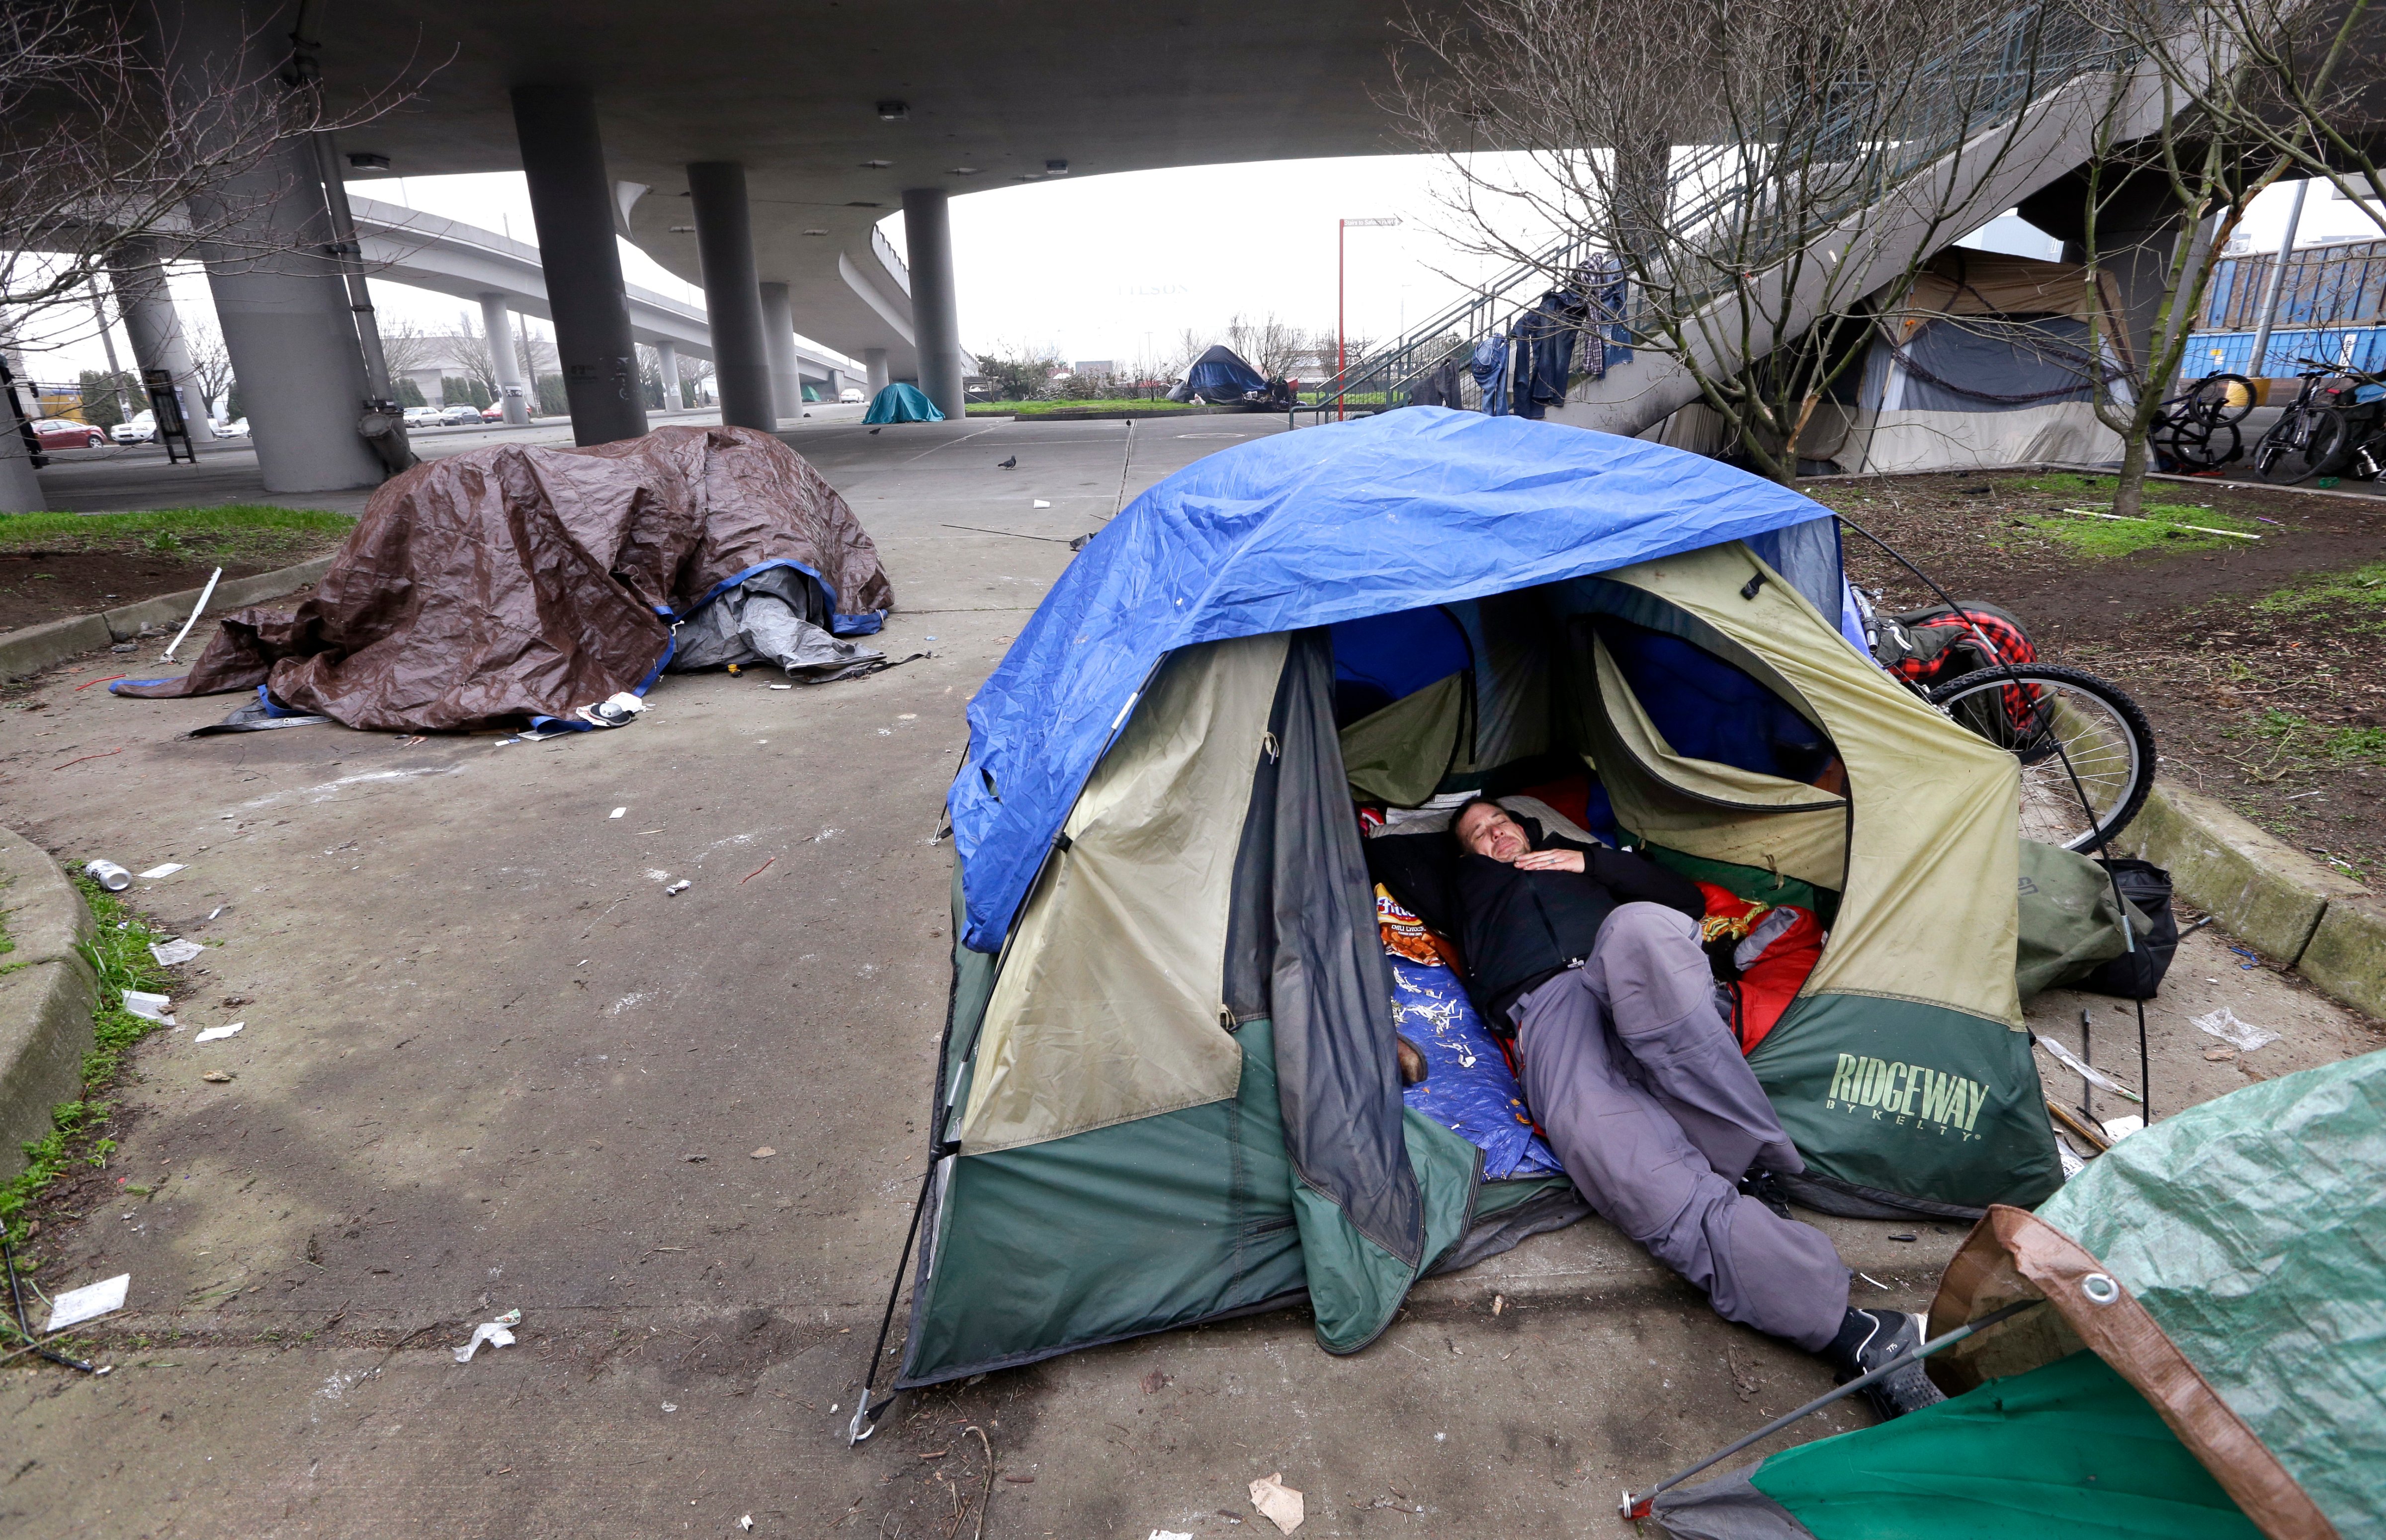 A man lies in a tent with others camped nearby, under and near an overpass in Seattle on Tuesday, Feb. 9, 2016. Seattle has the third-highest number of homeless people in the U.S. (Elaine Thompson—AP)